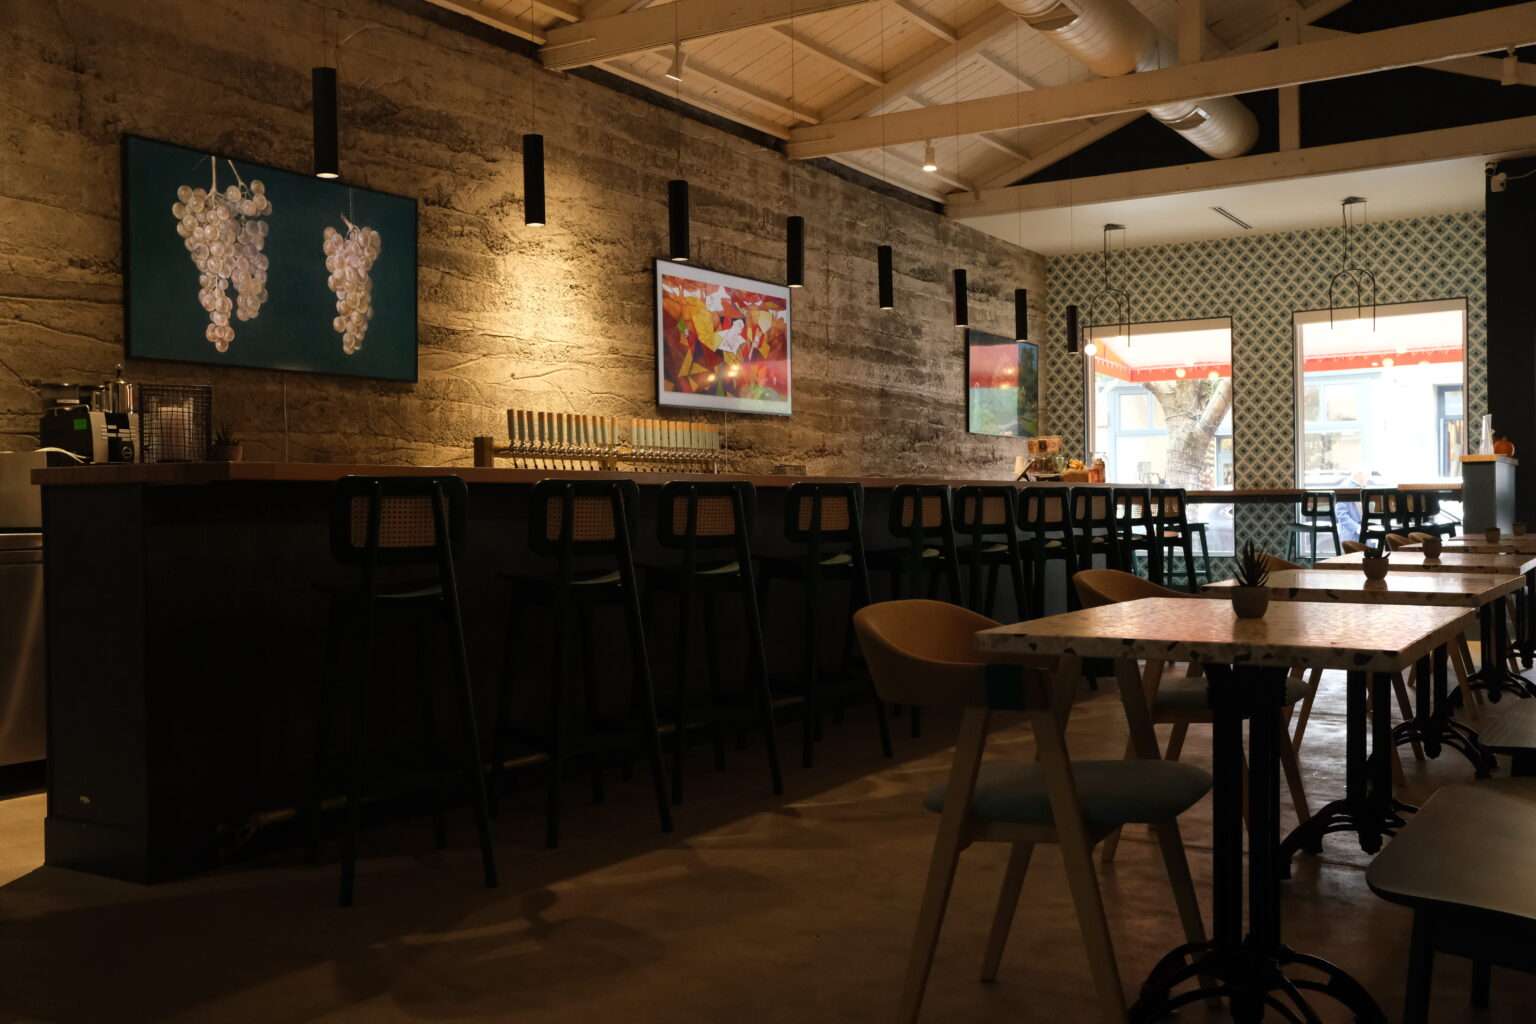 Interior of the Tap House showcasing the bar area, taps and seating